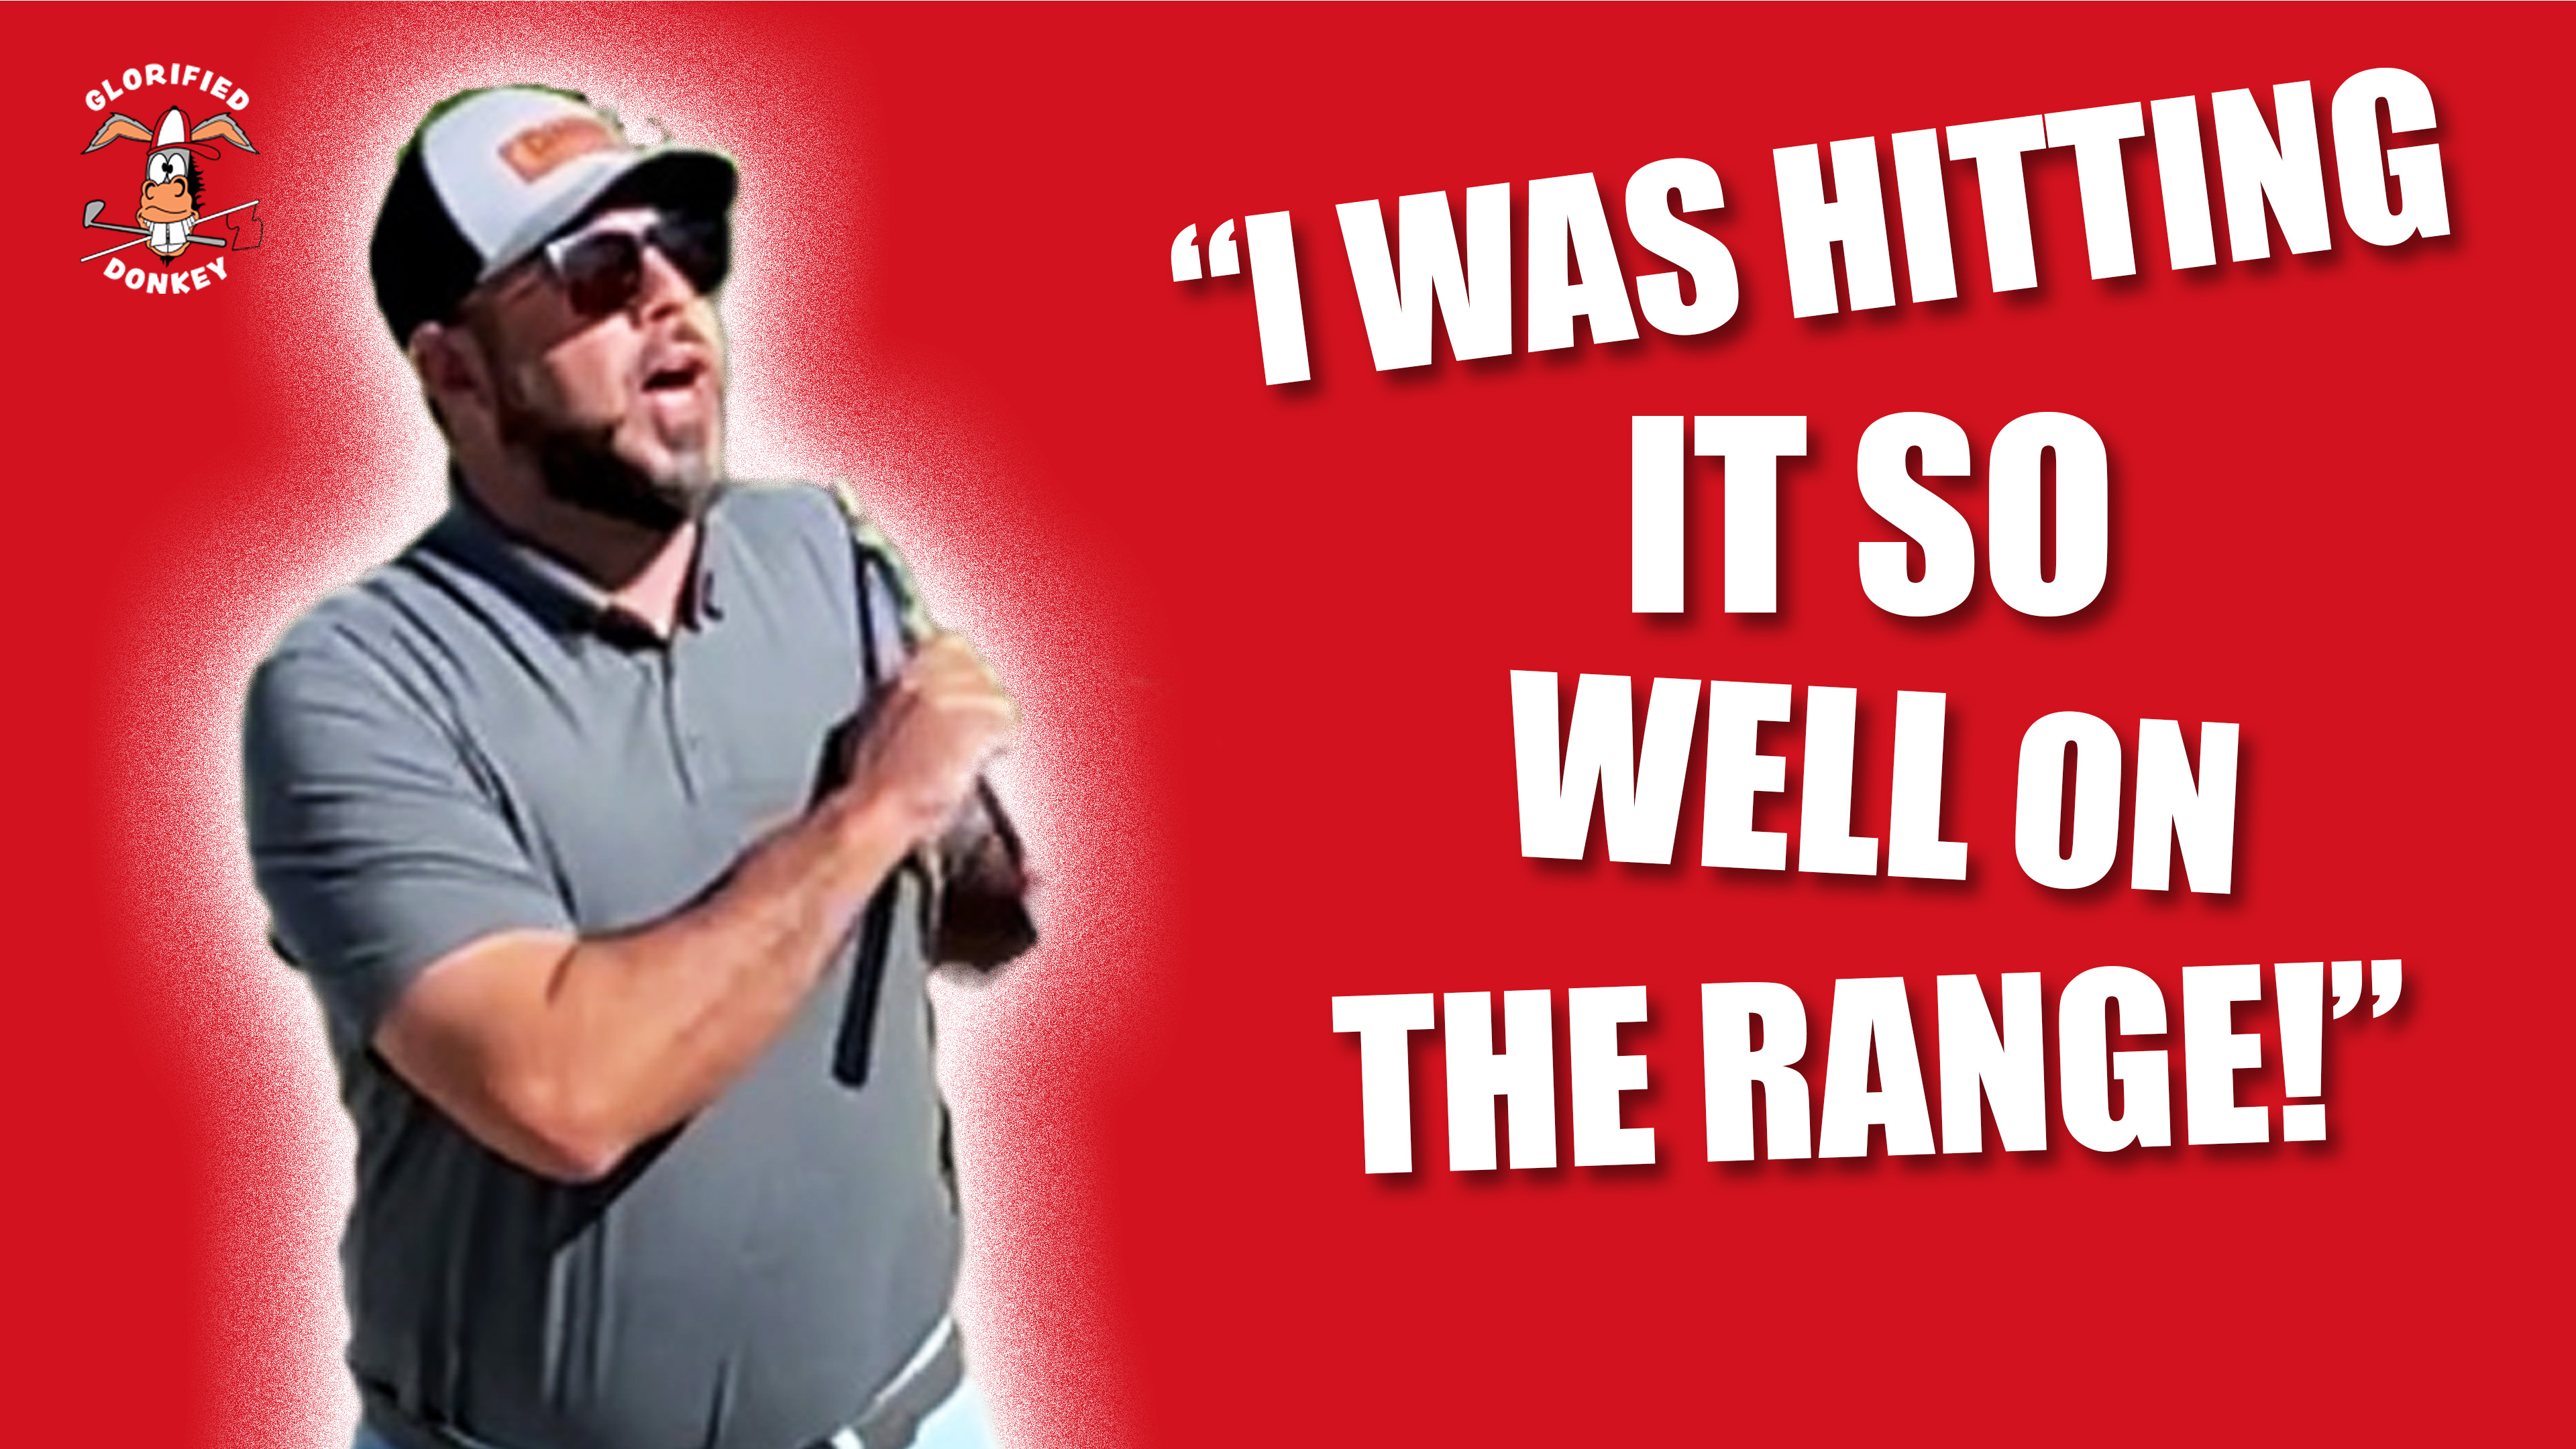 Compilation of An Amateur Golfer's Reactions Image